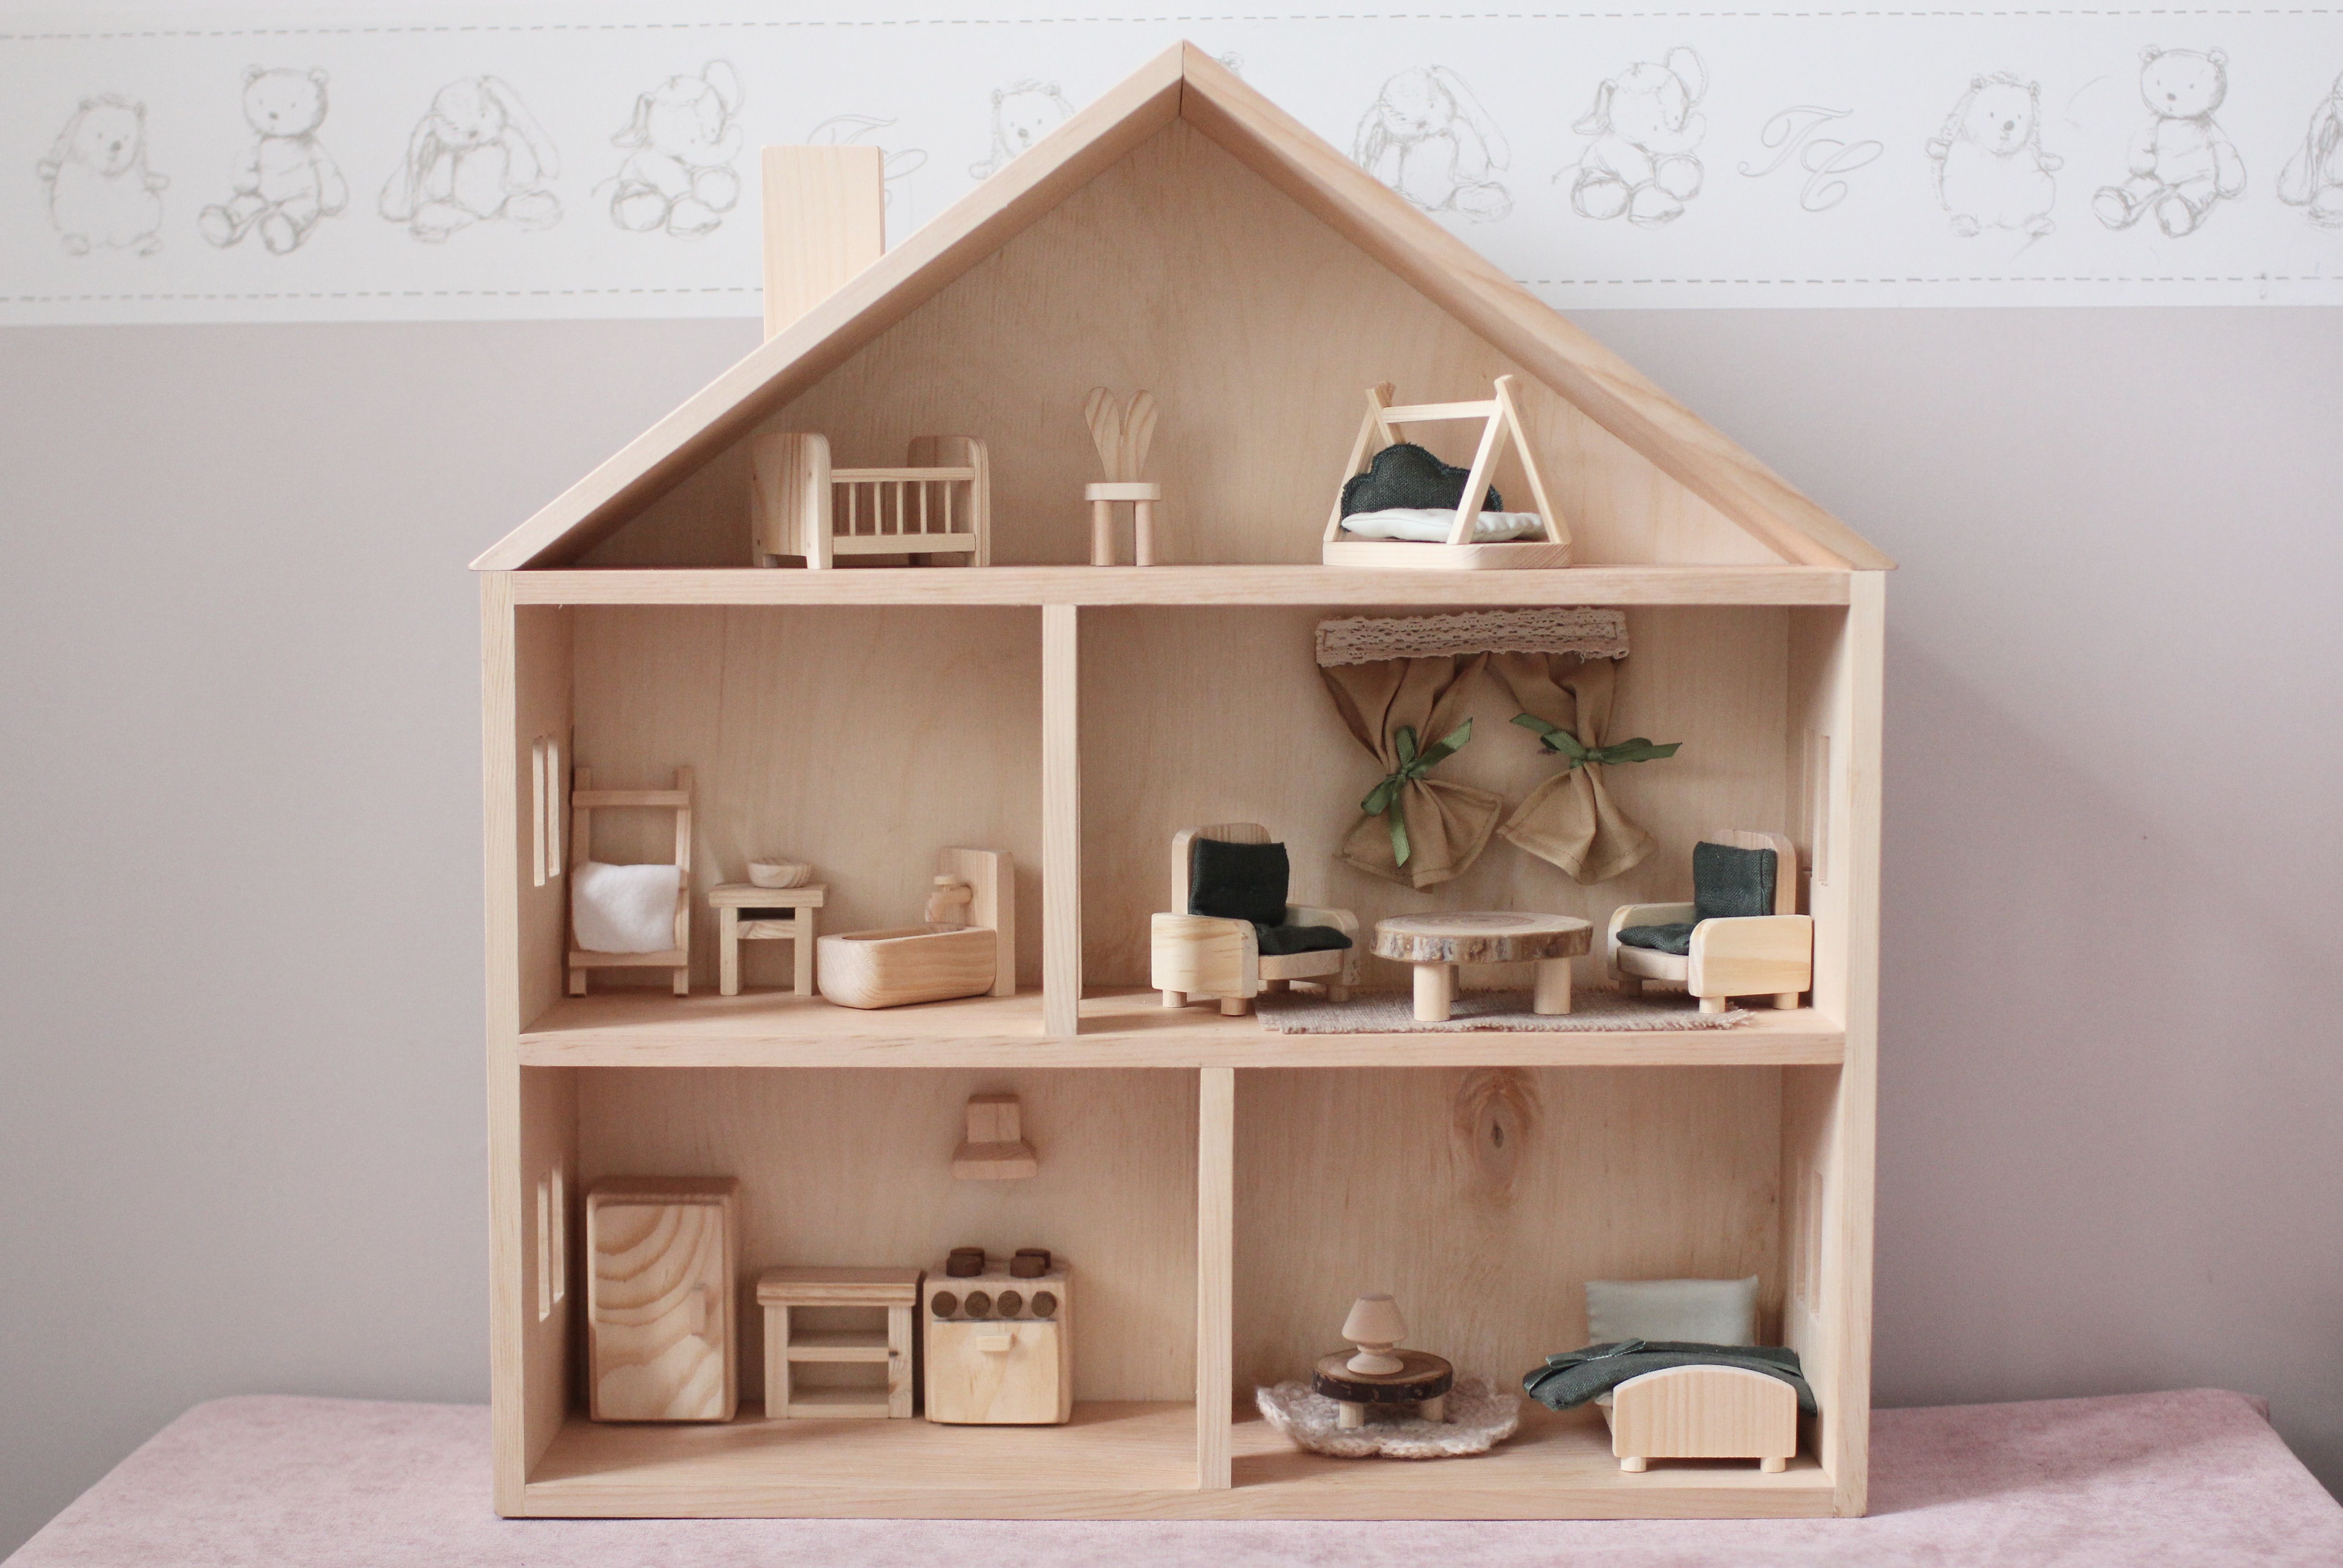 Handcrafted For Imagination: This Dollhouse Lets Kids